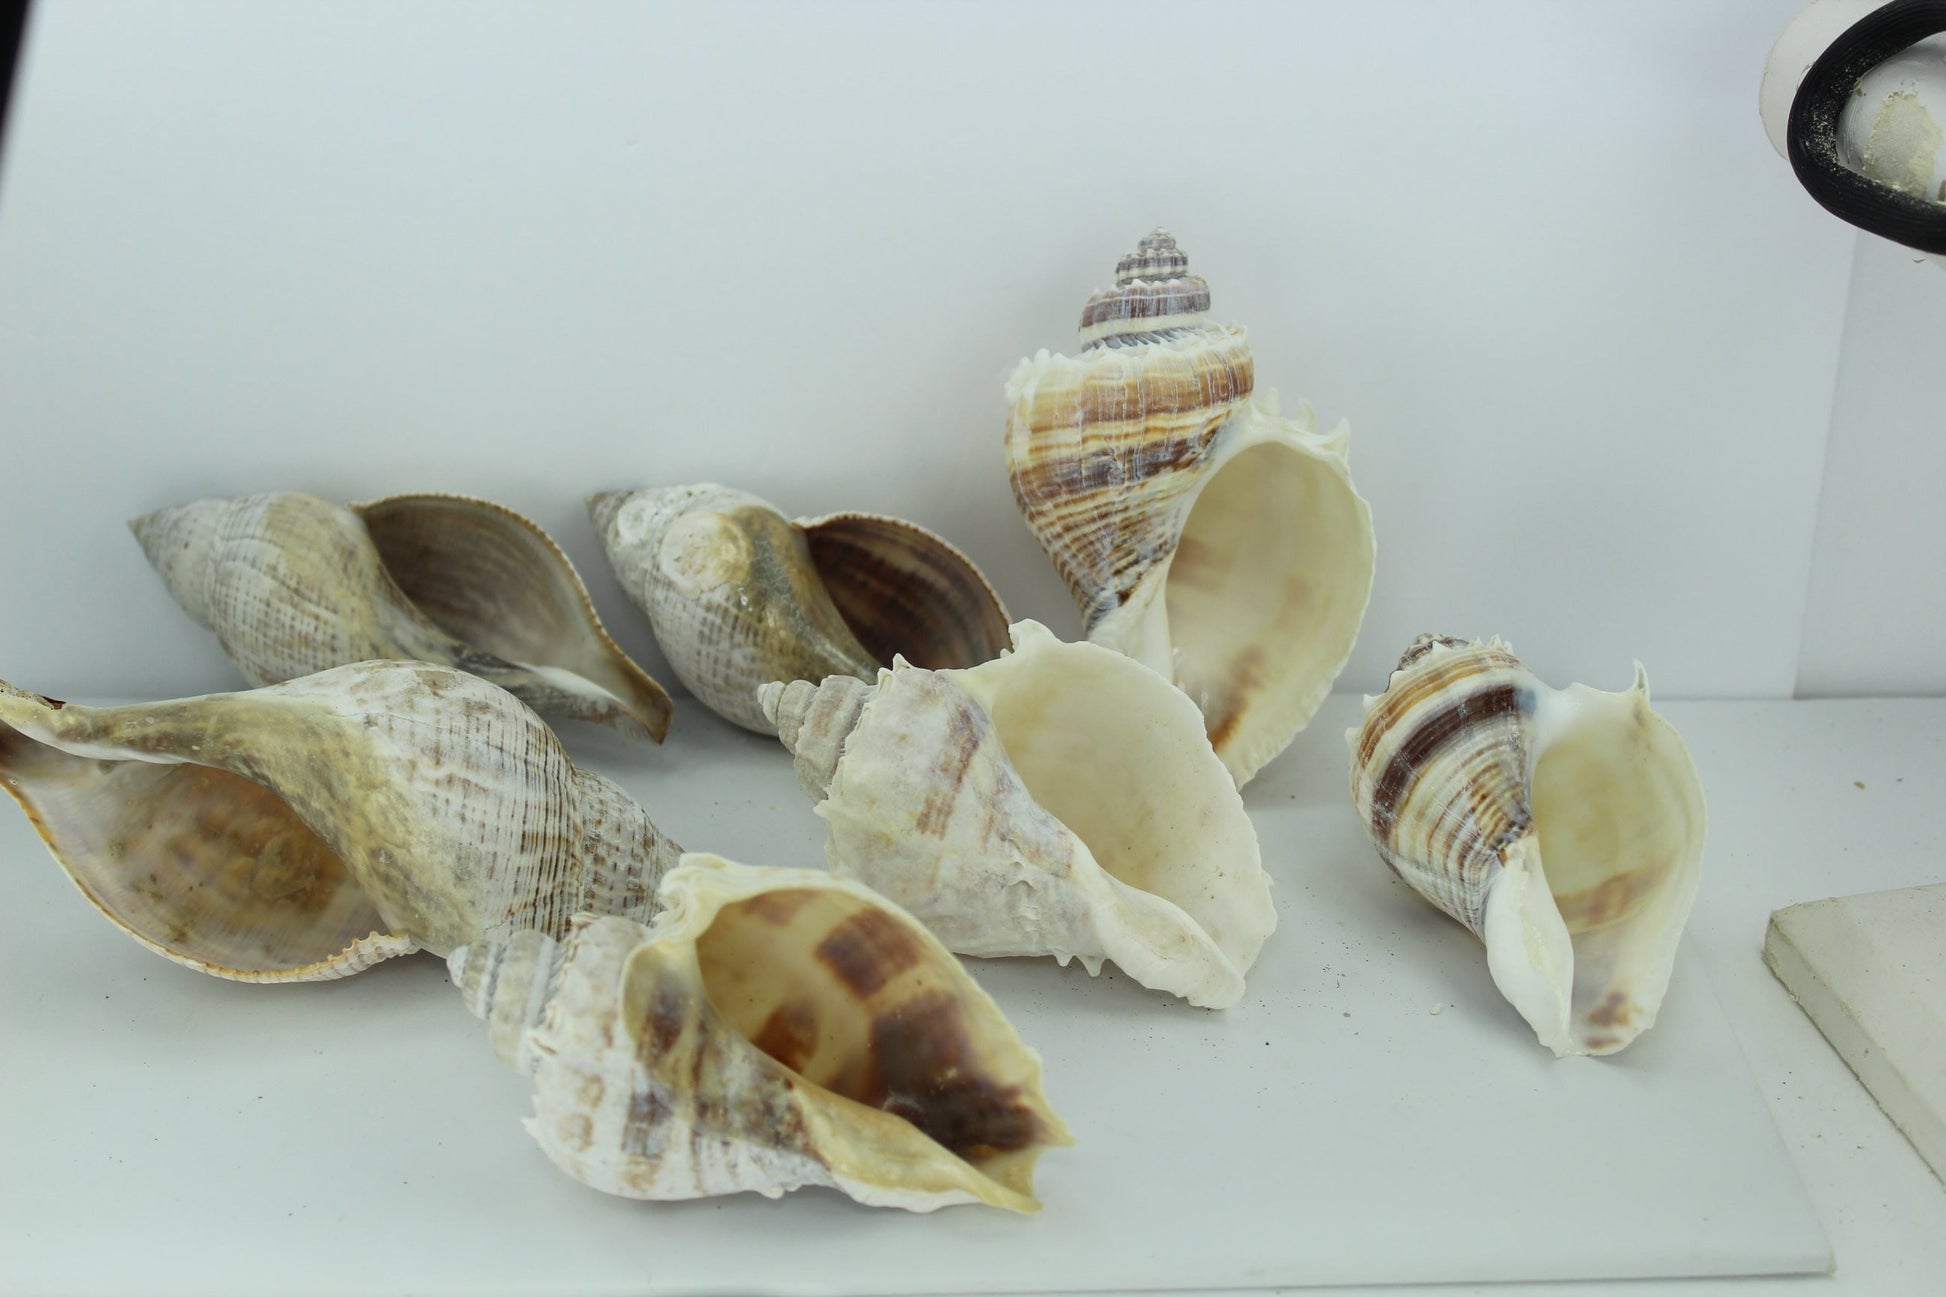 Florida King Crown Conch Shells 7 Large 4" 5 1/2" Vintage Estate Collection Shell Art Wreaths Mirrors Decor decorator